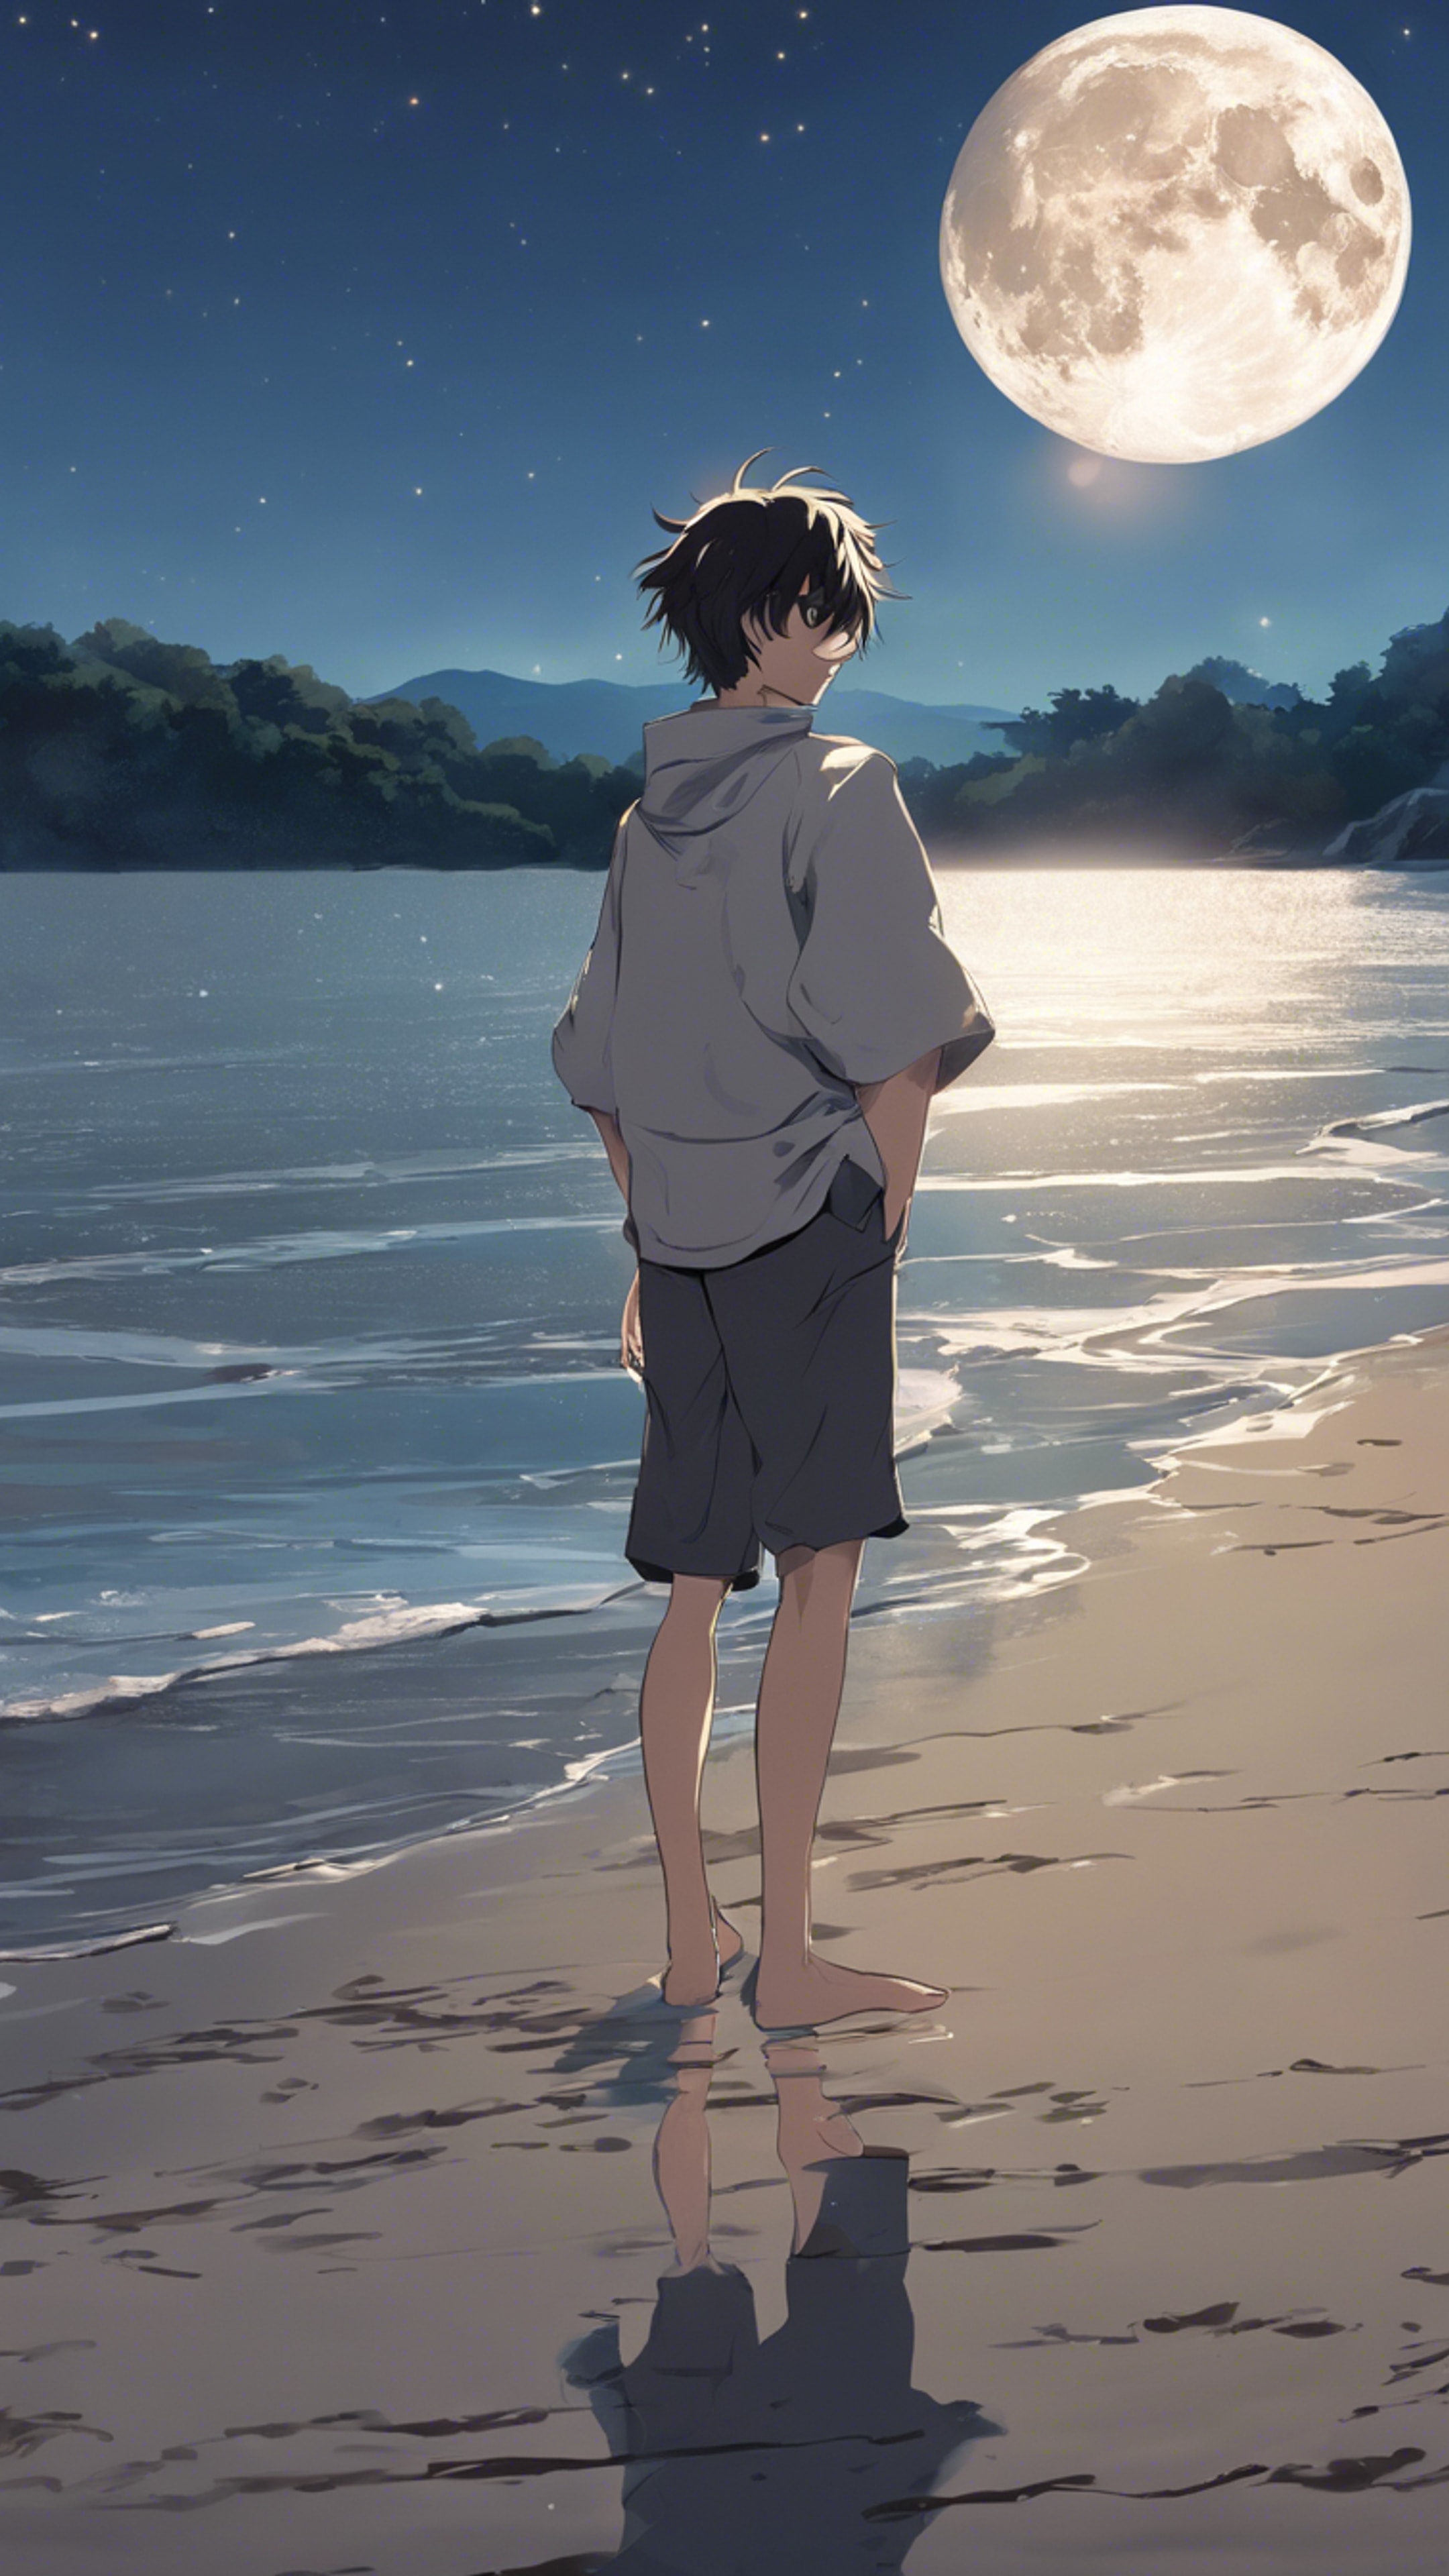 An anime boy standing barefoot on the shore, with the moon reflecting in upturned, joyous eyes. Tapet[a80f9c3e465041ad9759]